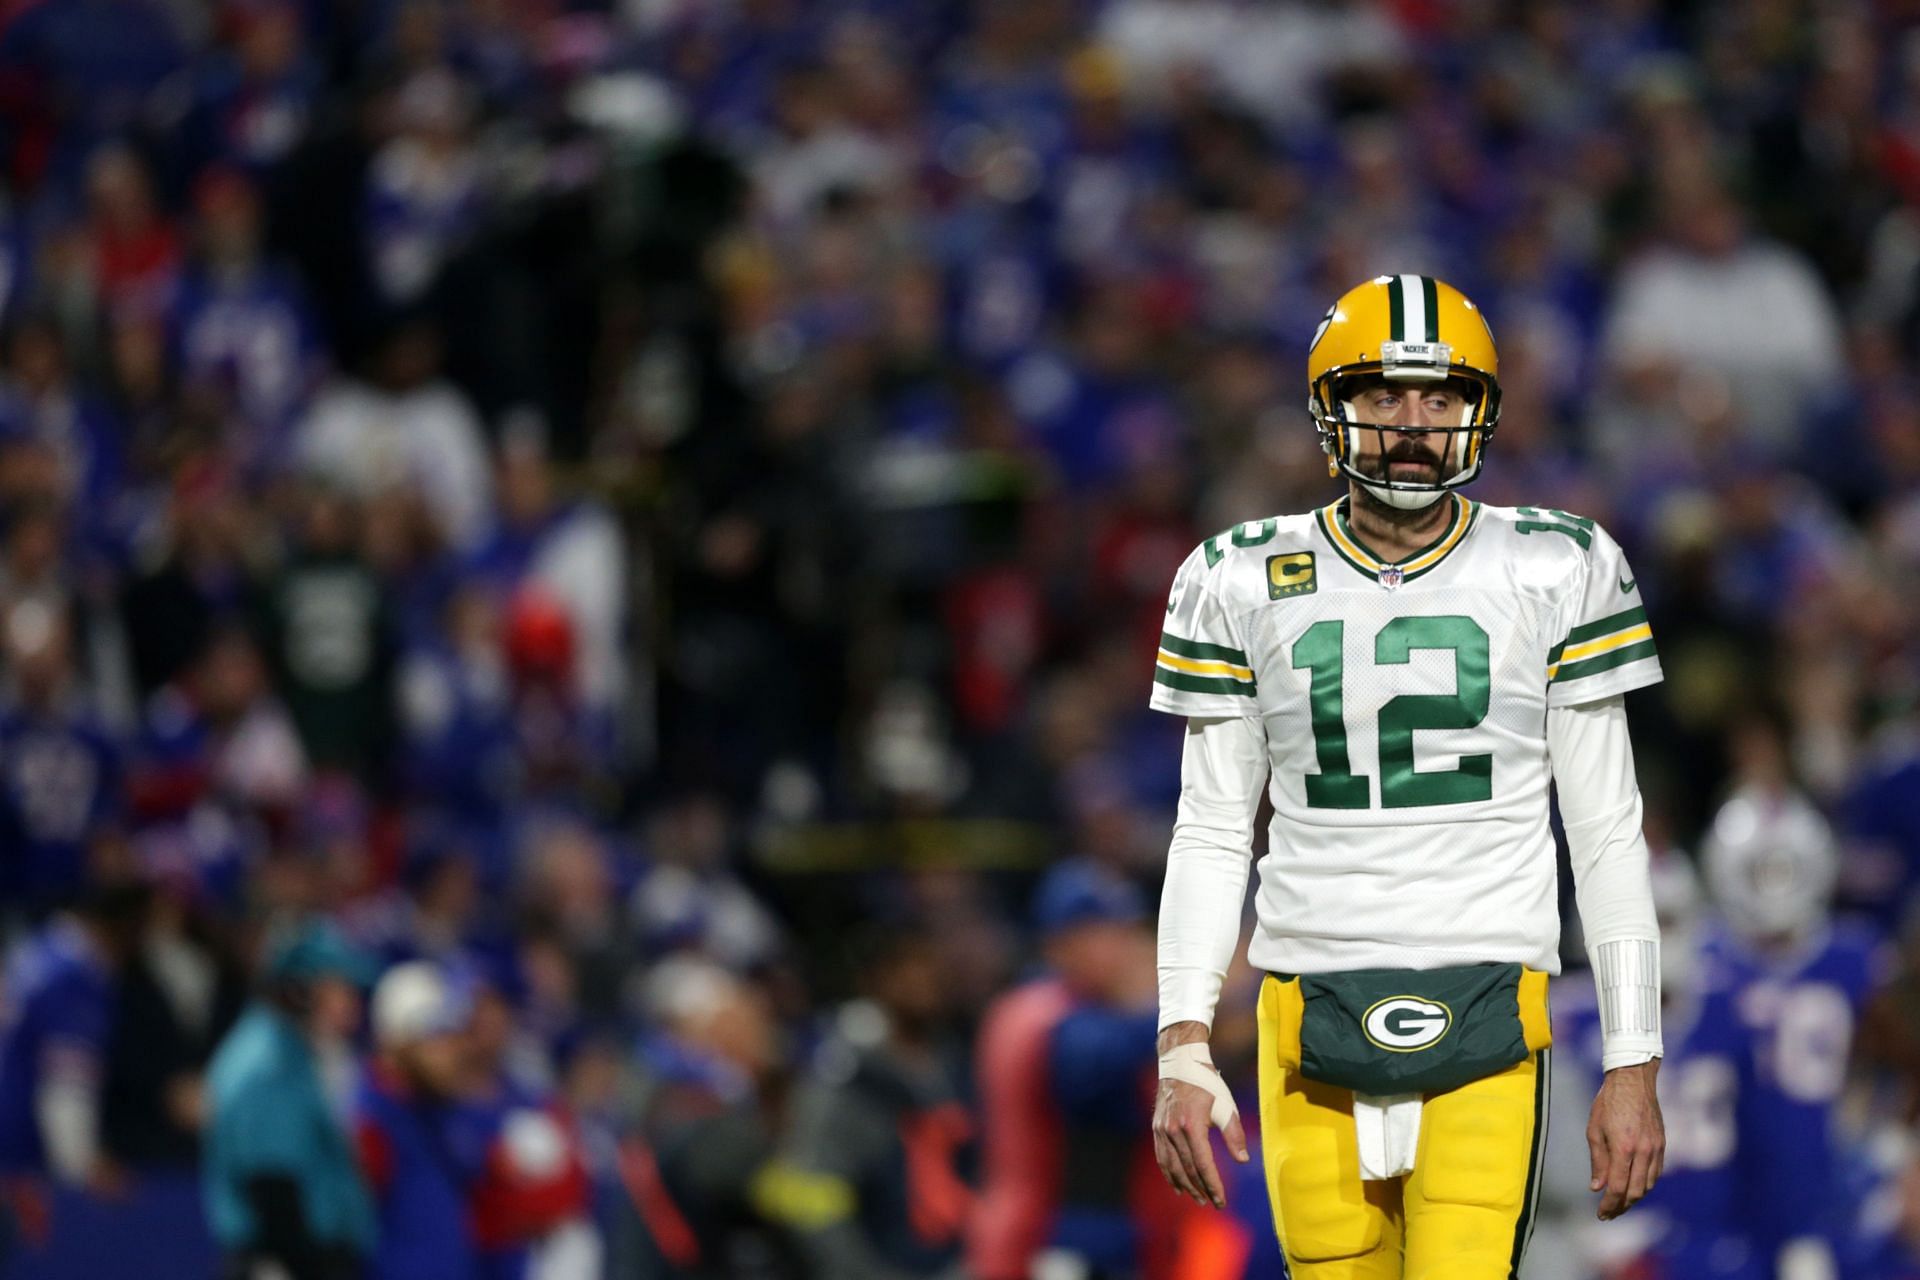 Rodgers&#039; use of psychedelics hasn&#039;t been panning out favorably this season.